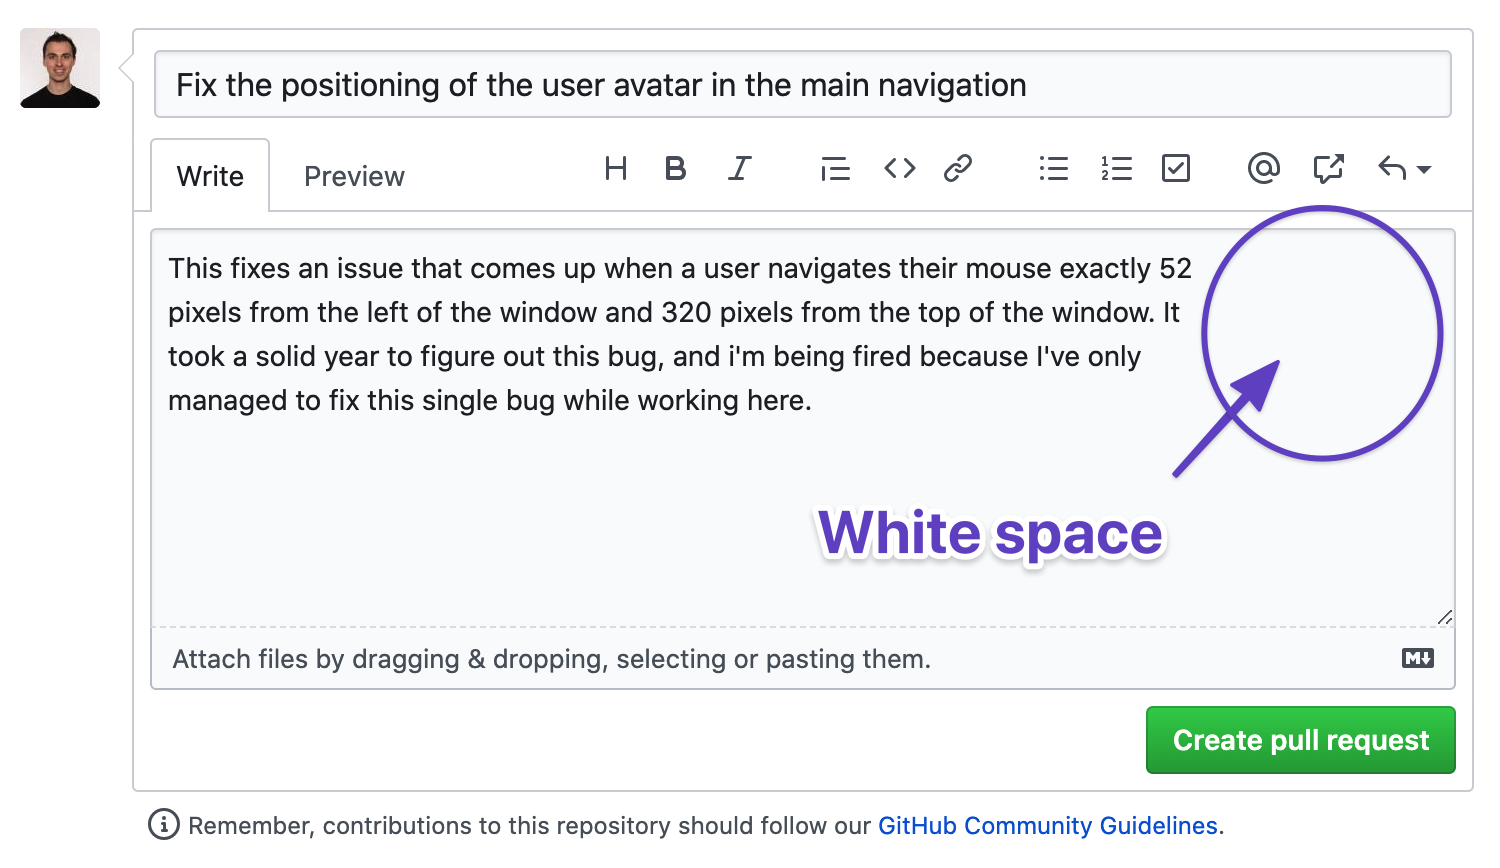 Here's a look at the whitespace that is left in the pull request description when wrapping commit message body text at 80 characters.